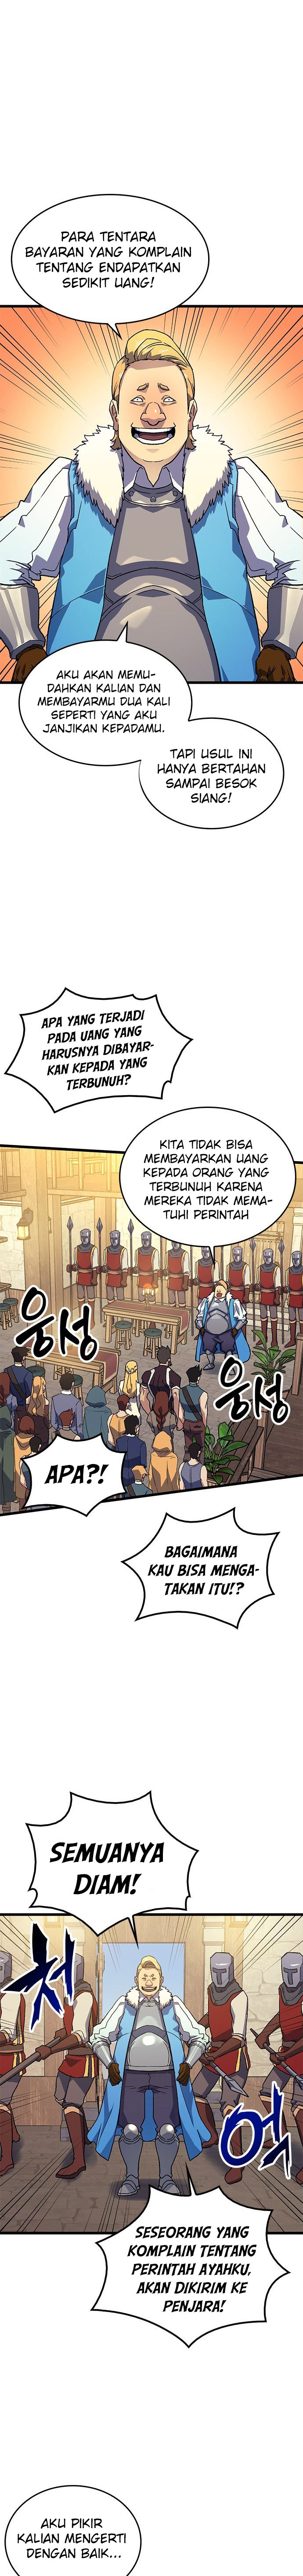 Wizard of Arsenia Chapter 4